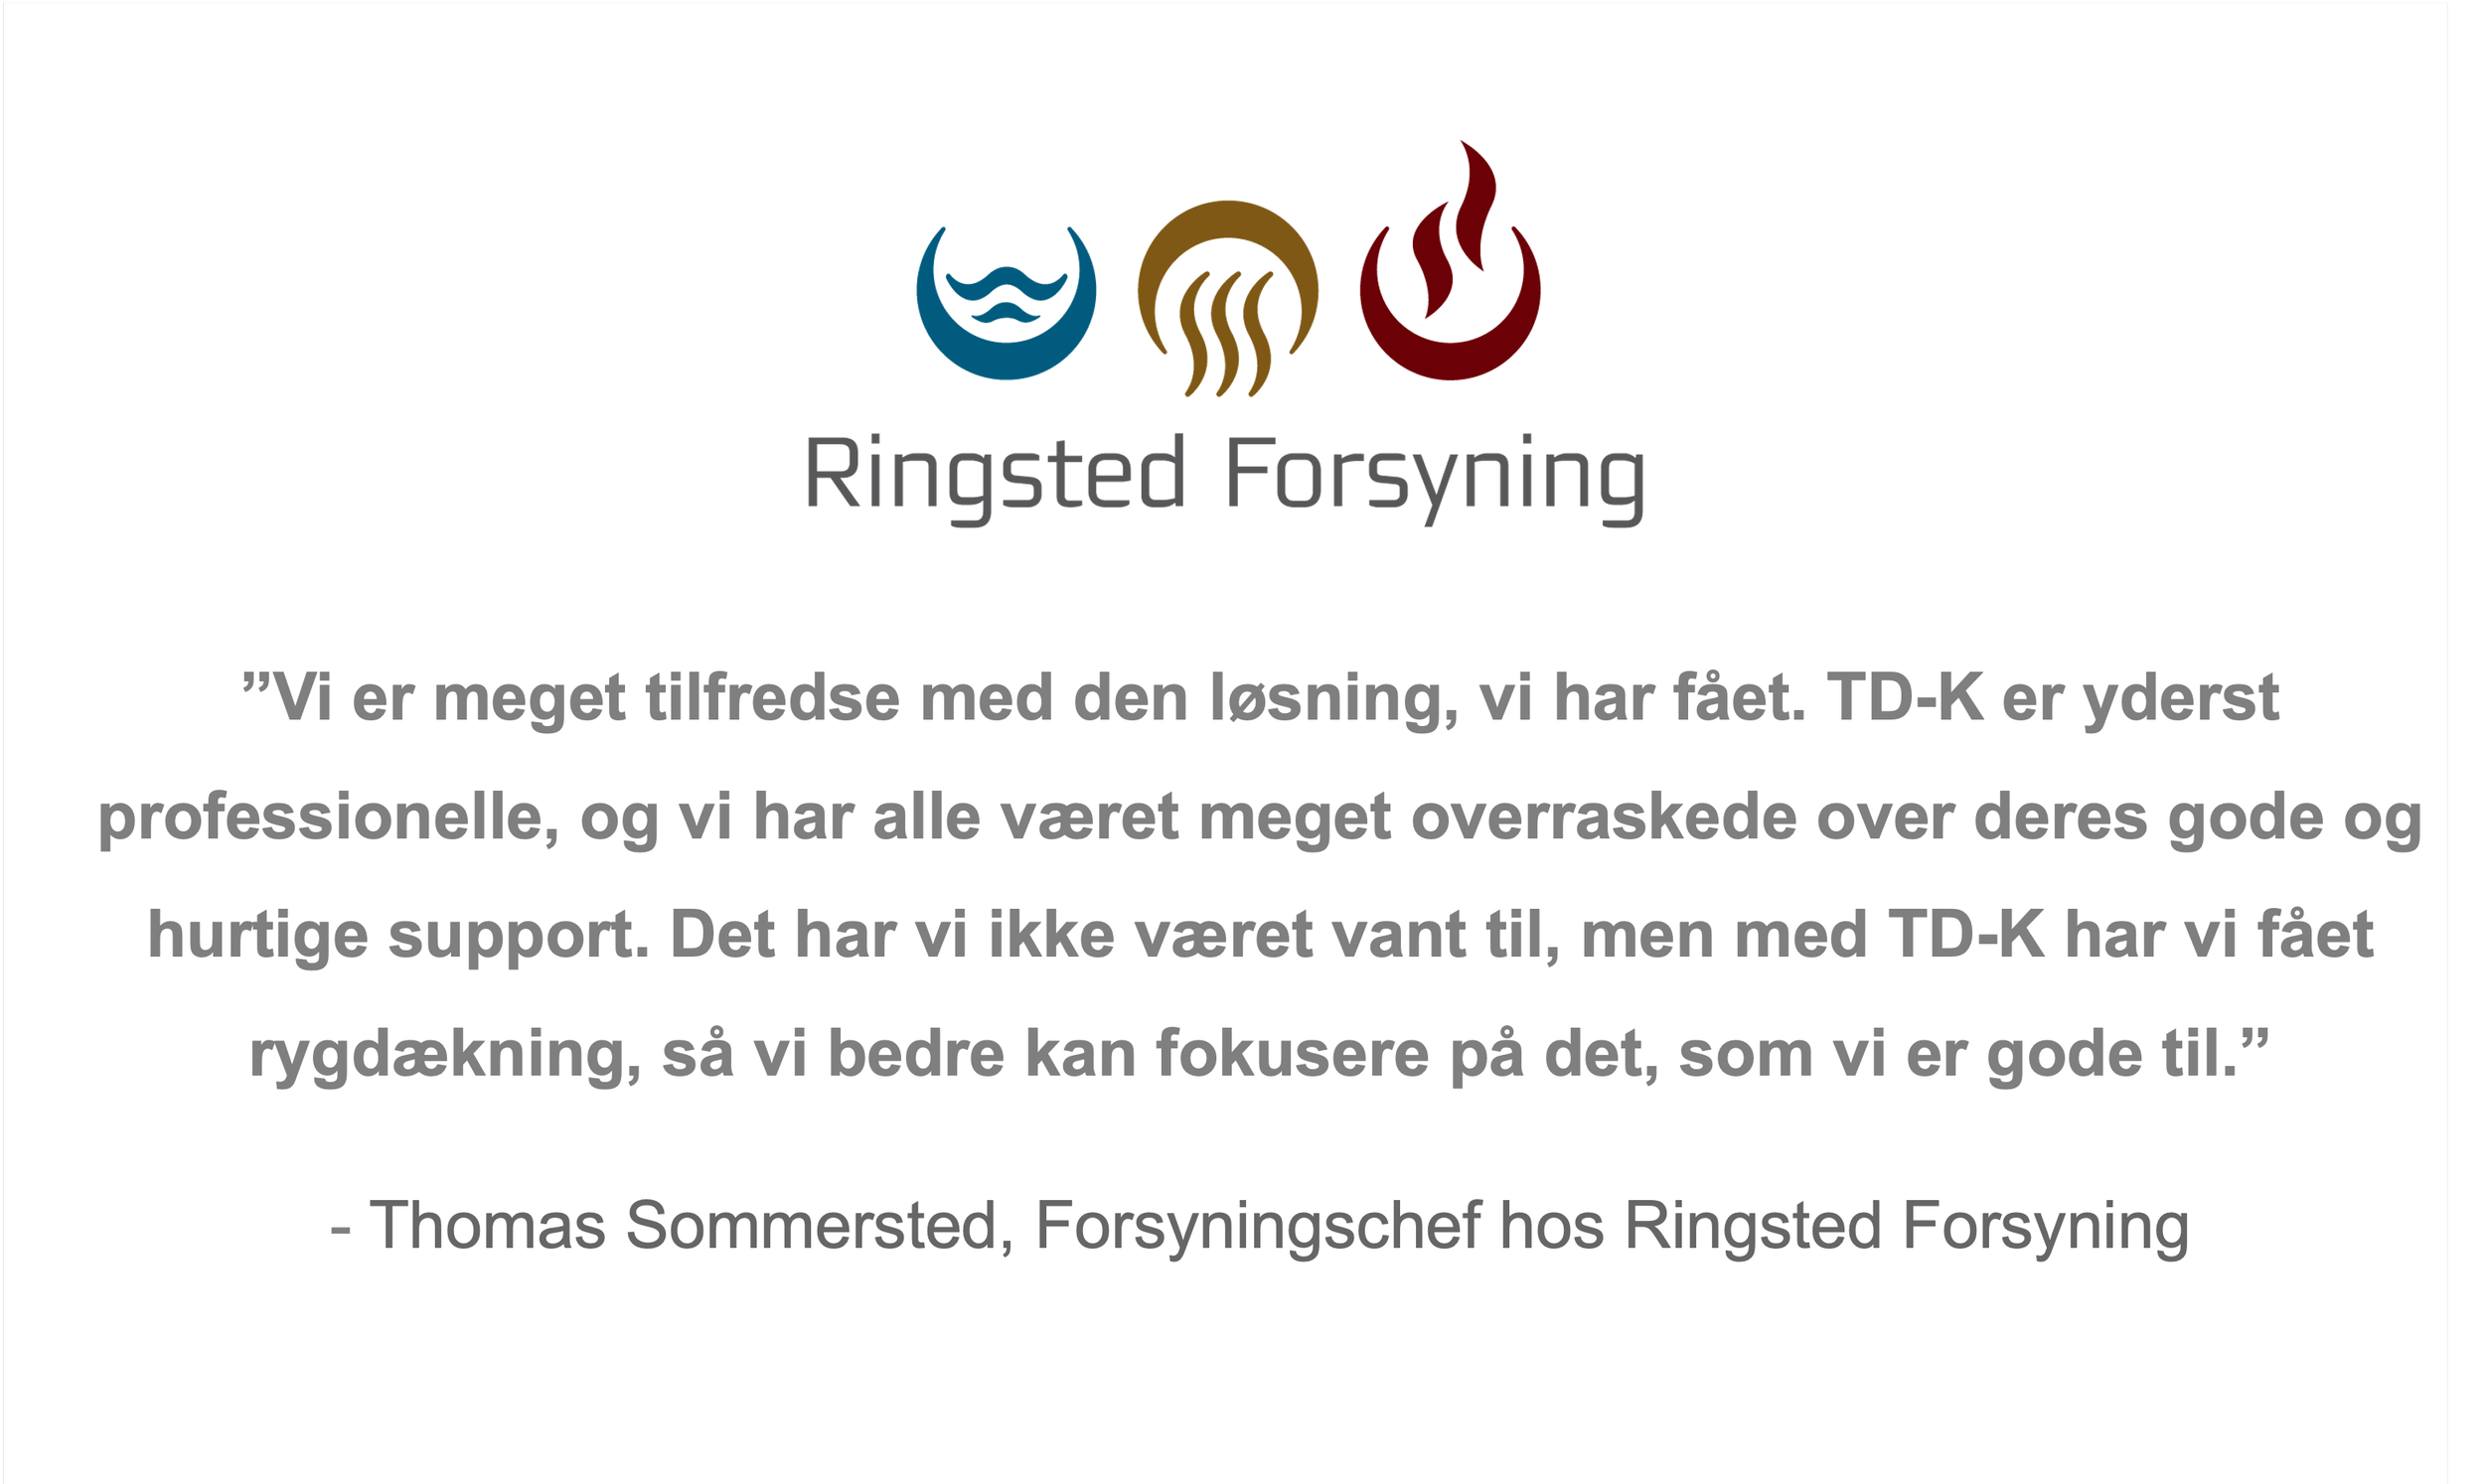 Ringsted Forsyning